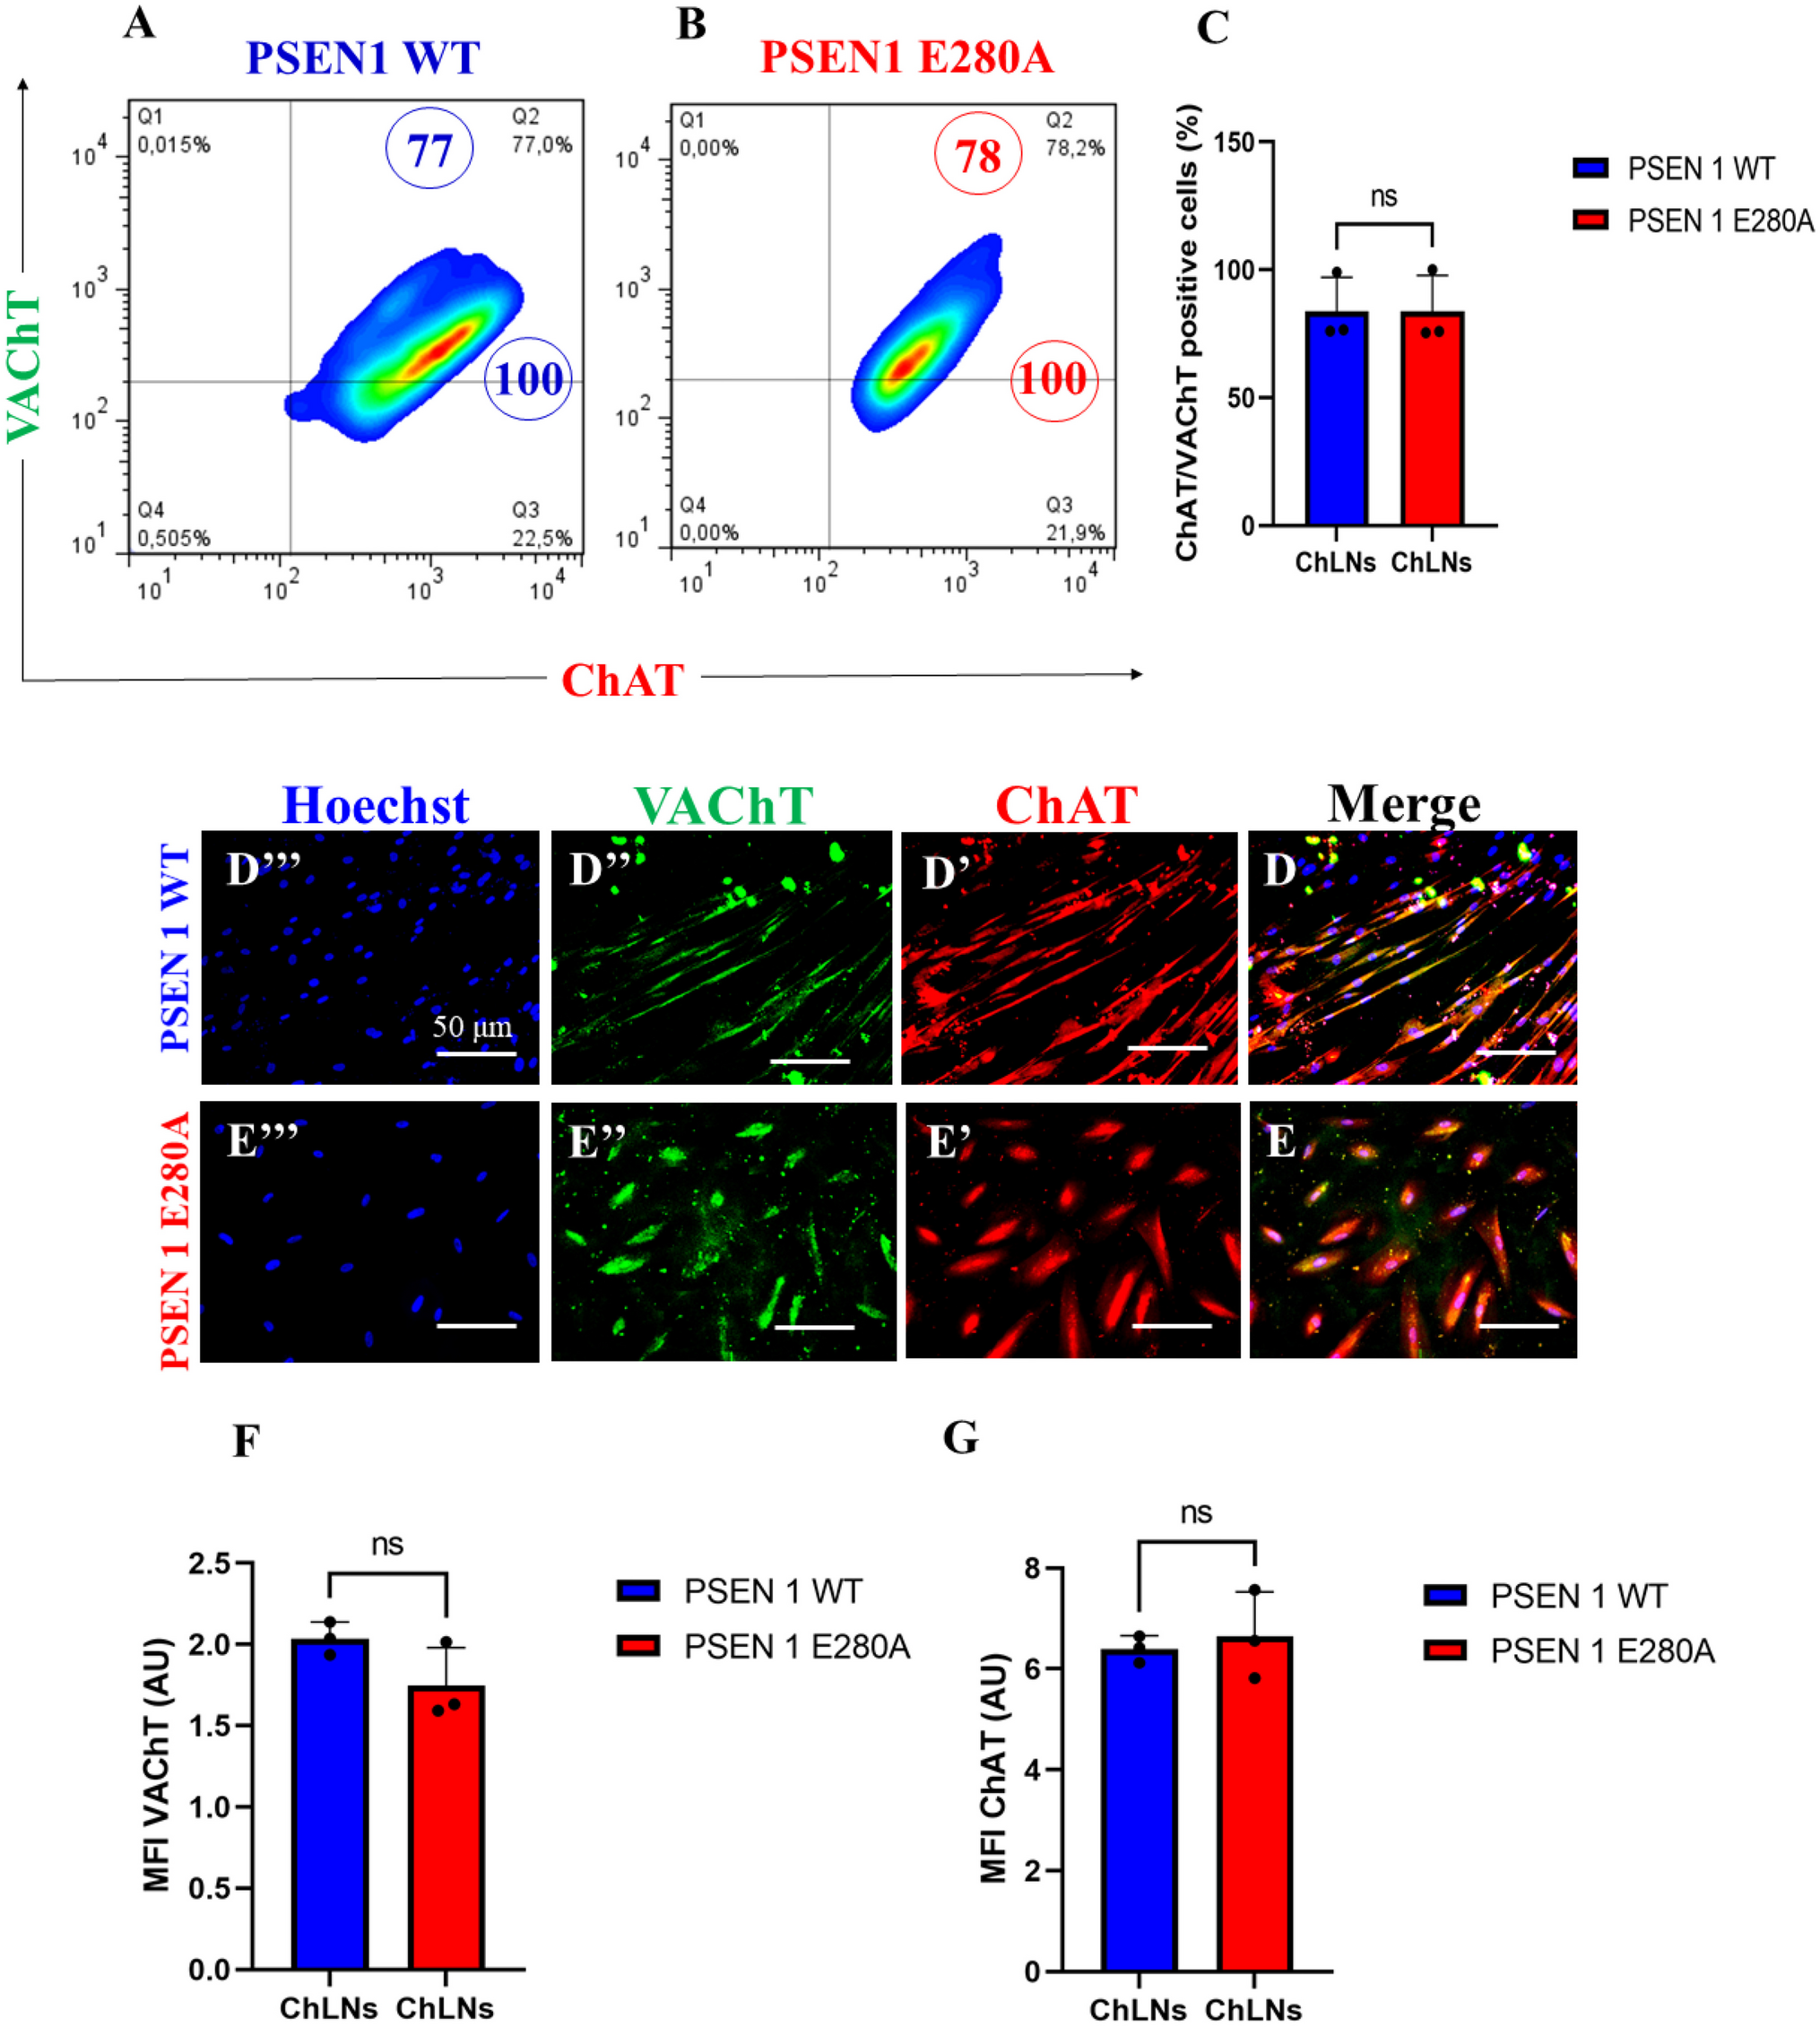 Rotenone Induces a Neuropathological Phenotype in Cholinergic-like Neurons Resembling Parkinson’s Disease Dementia (PDD)